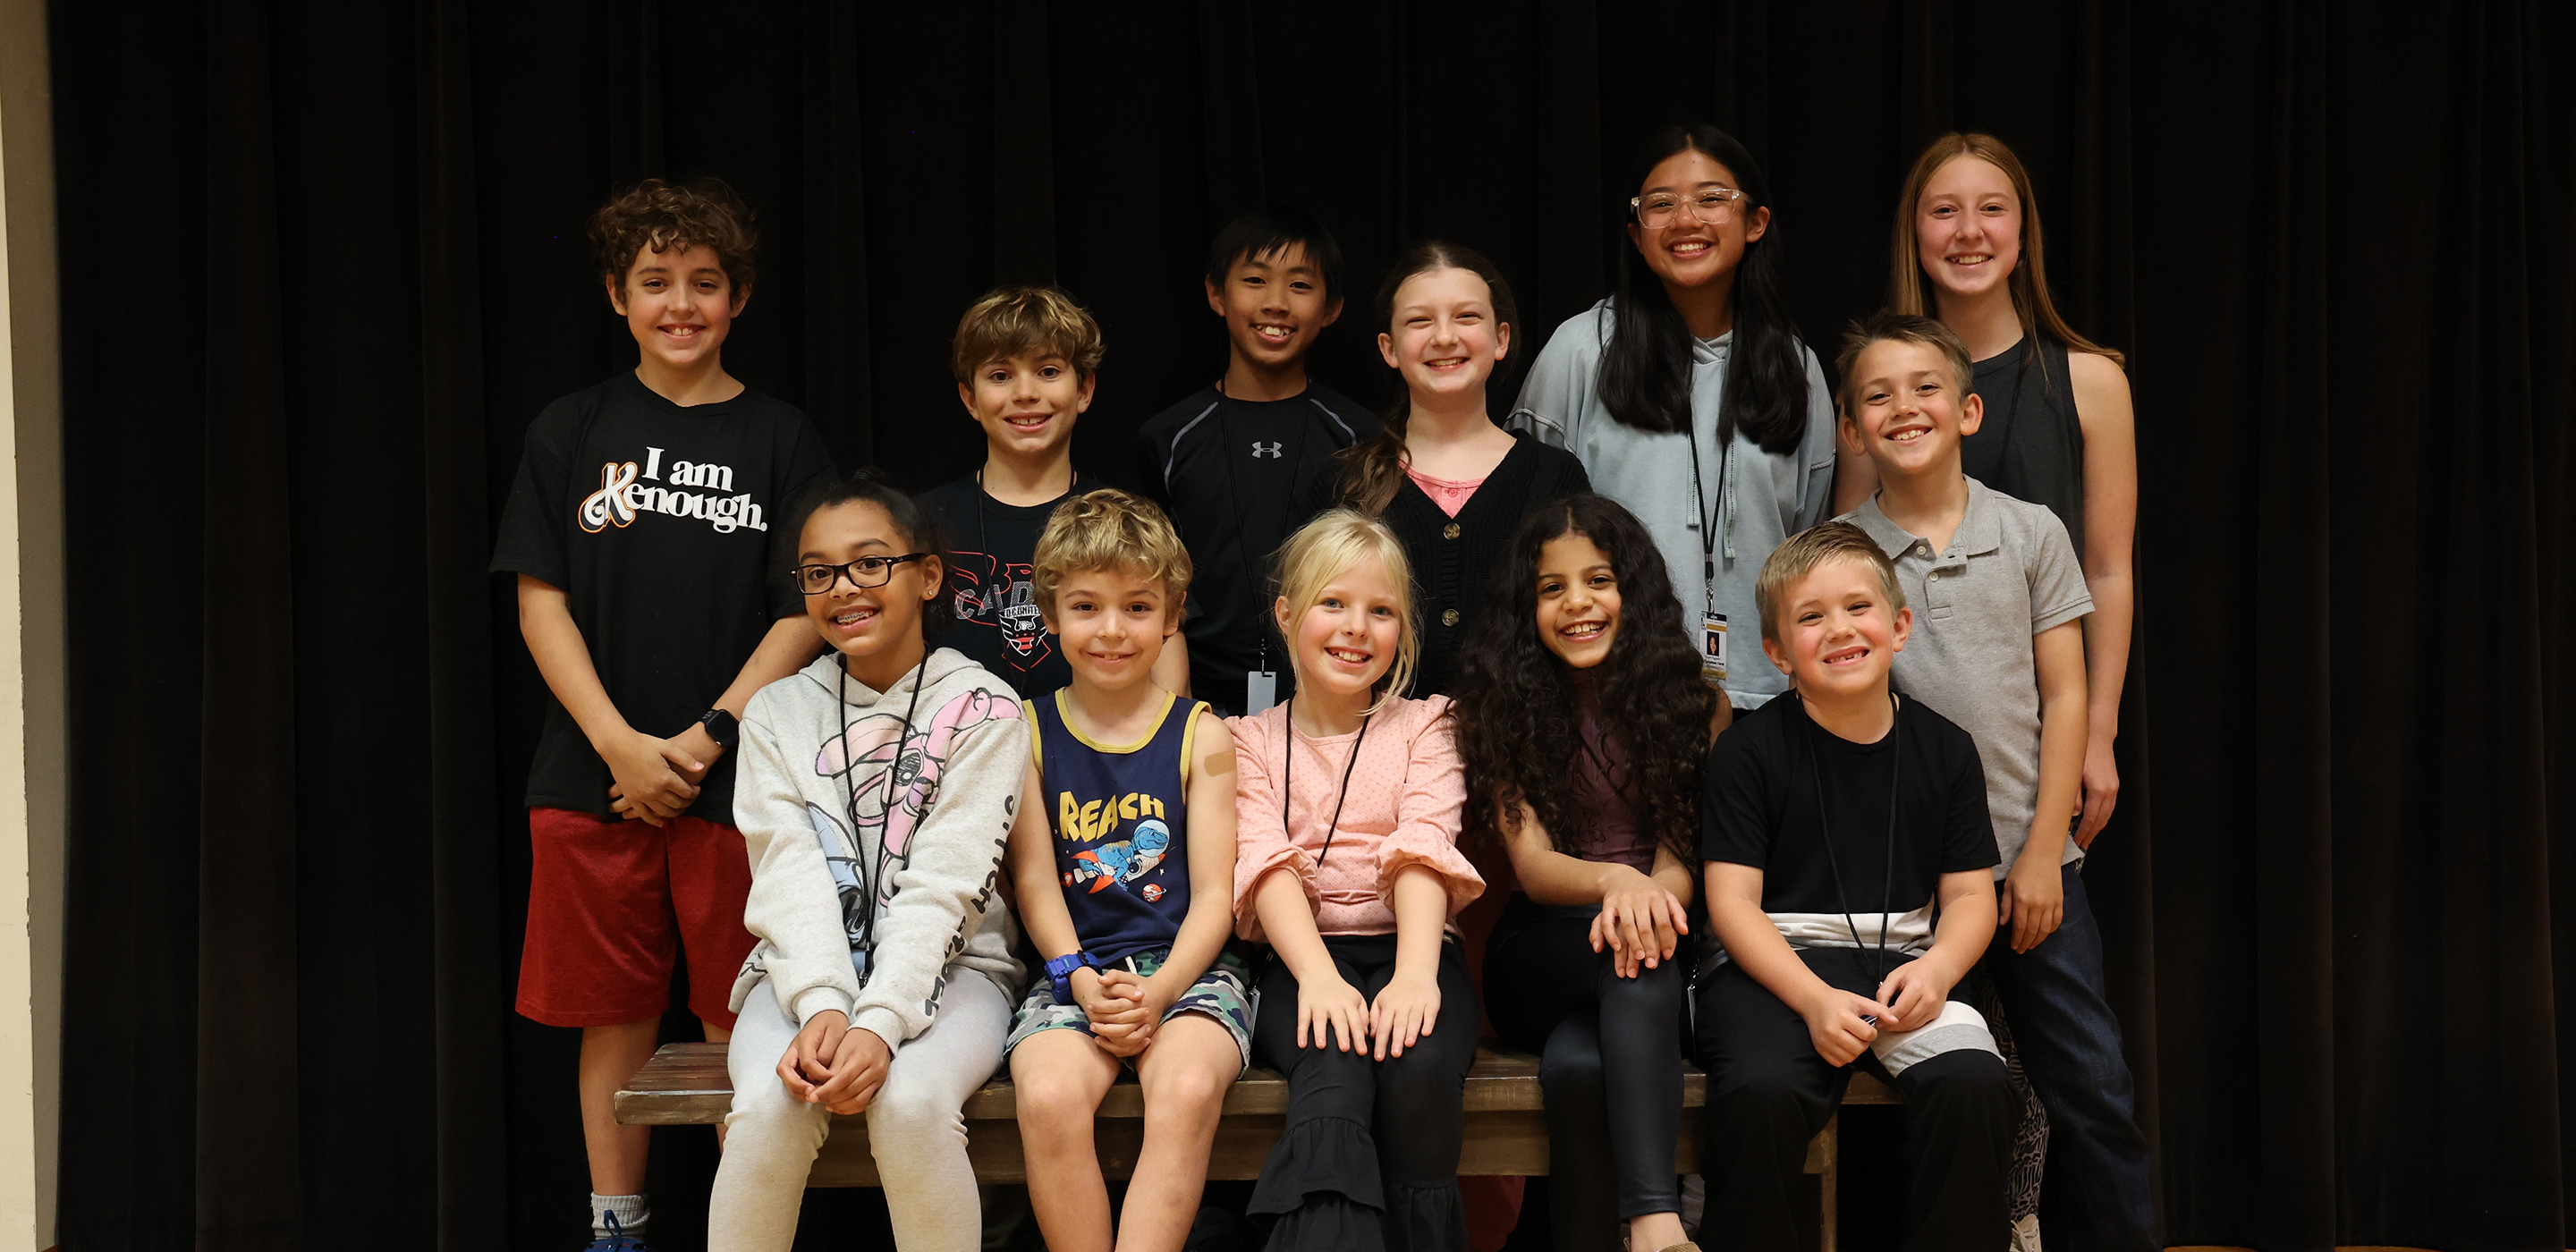 A group of diverse child actors smile excitedly and pose for a group photo at a first rehearsal. Half of the group is standing, and half is sitting on a bench, in front of a black curtain.